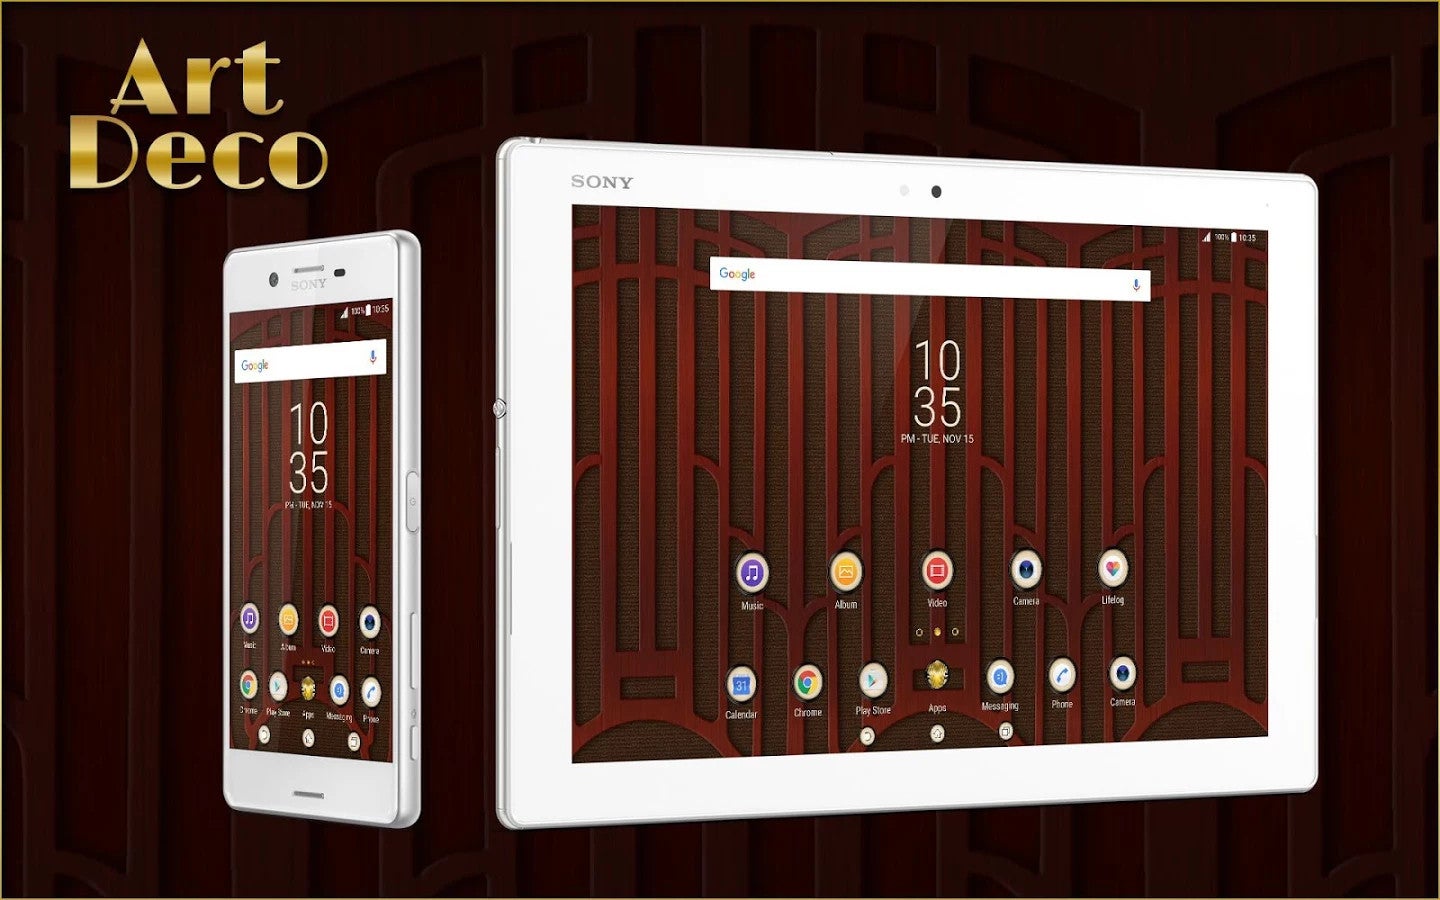 All hail the architects! Sony launches Xperia Art Deco theme